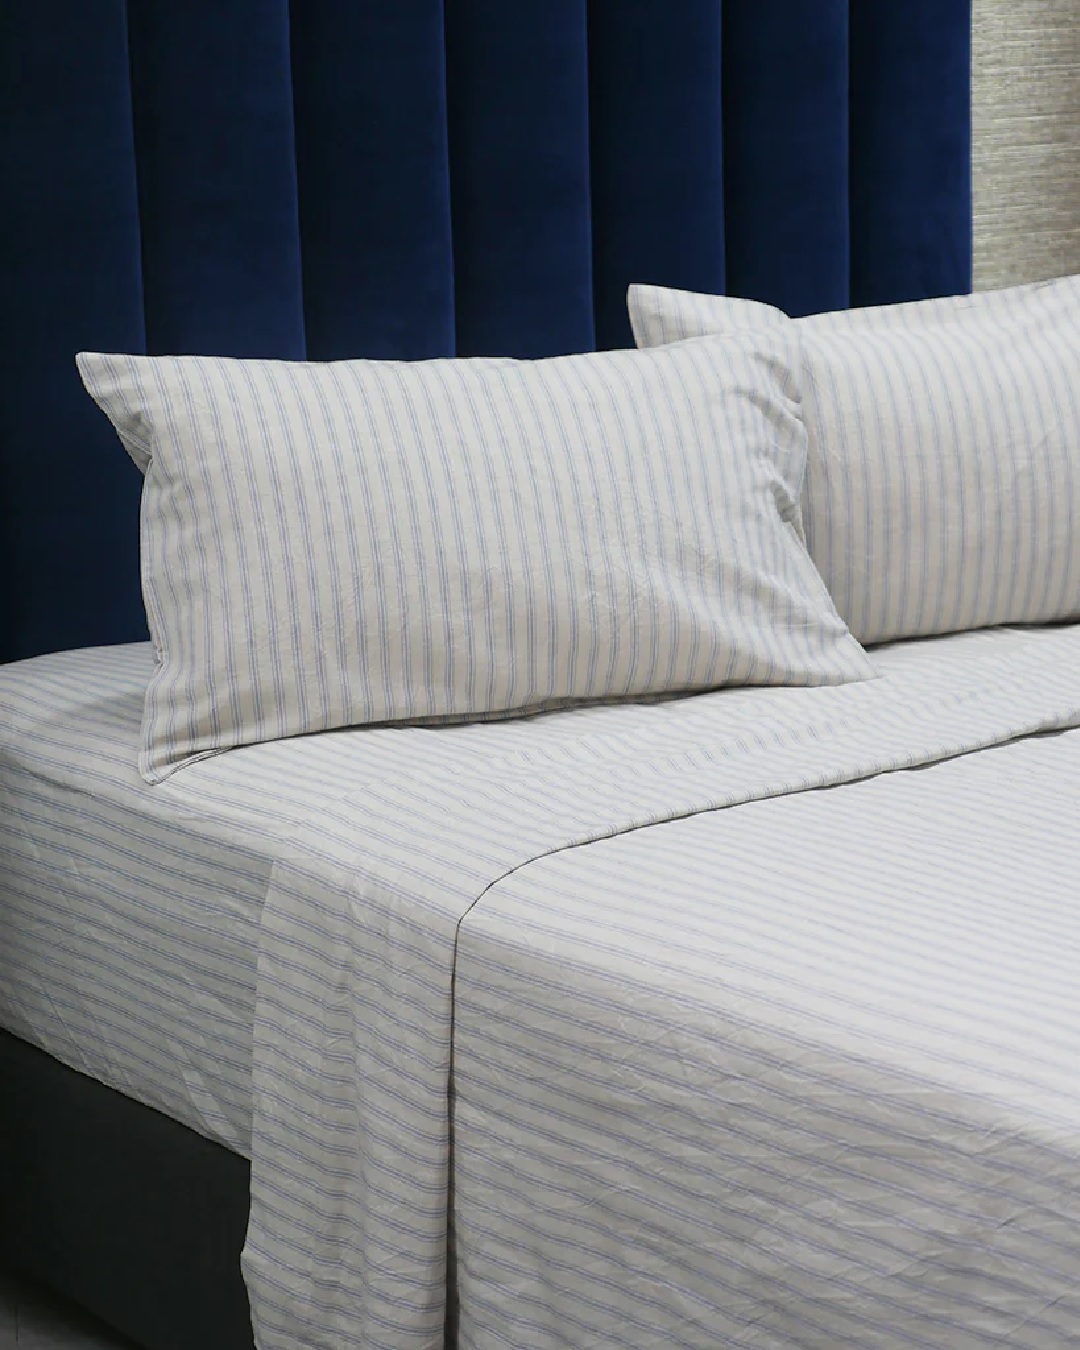 Striped blue and white sheets on bed with pillows